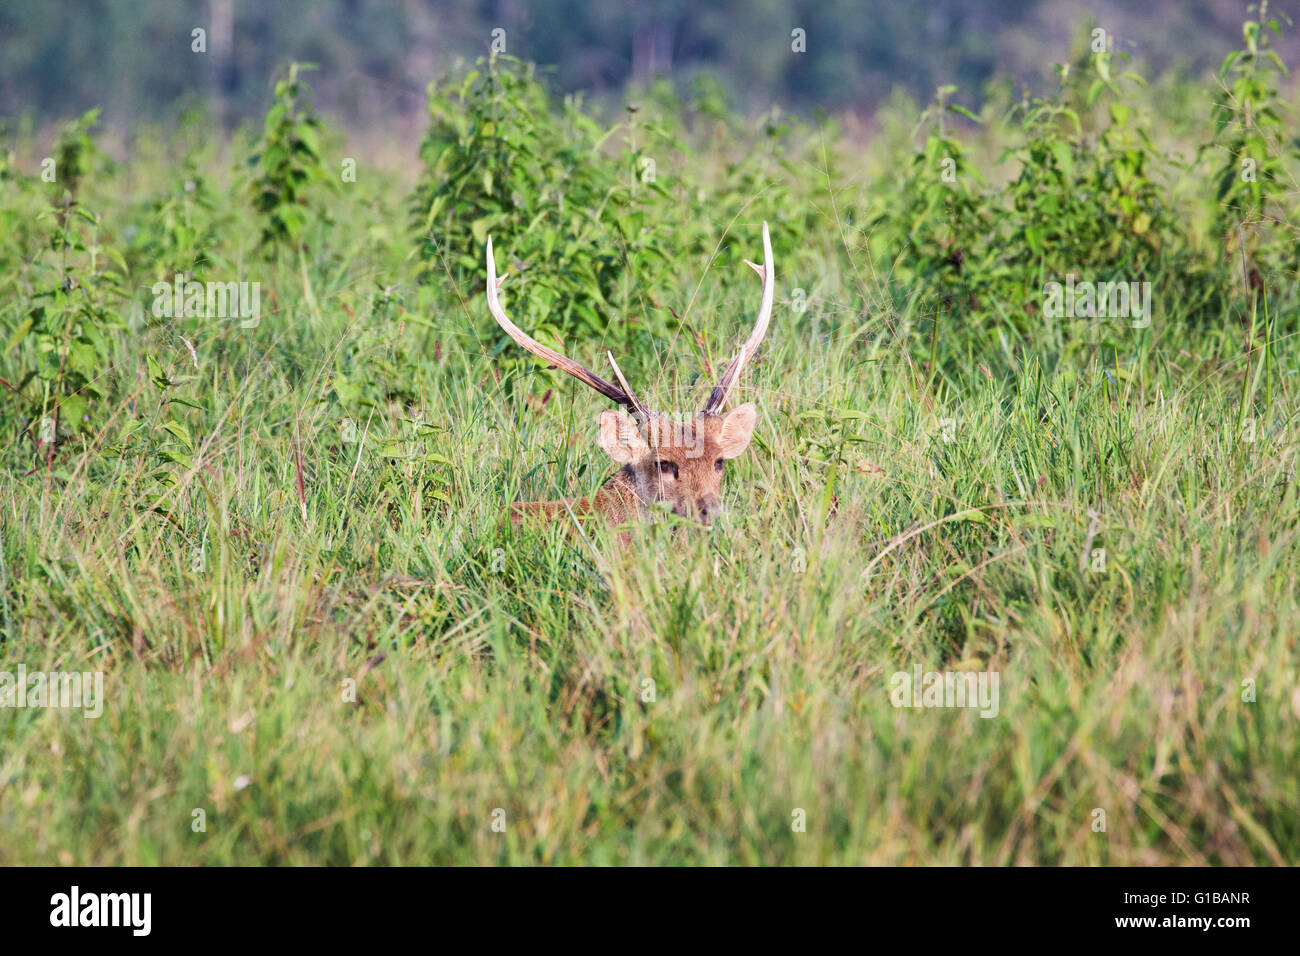 male hog deer live on the grass green field Stock Photo